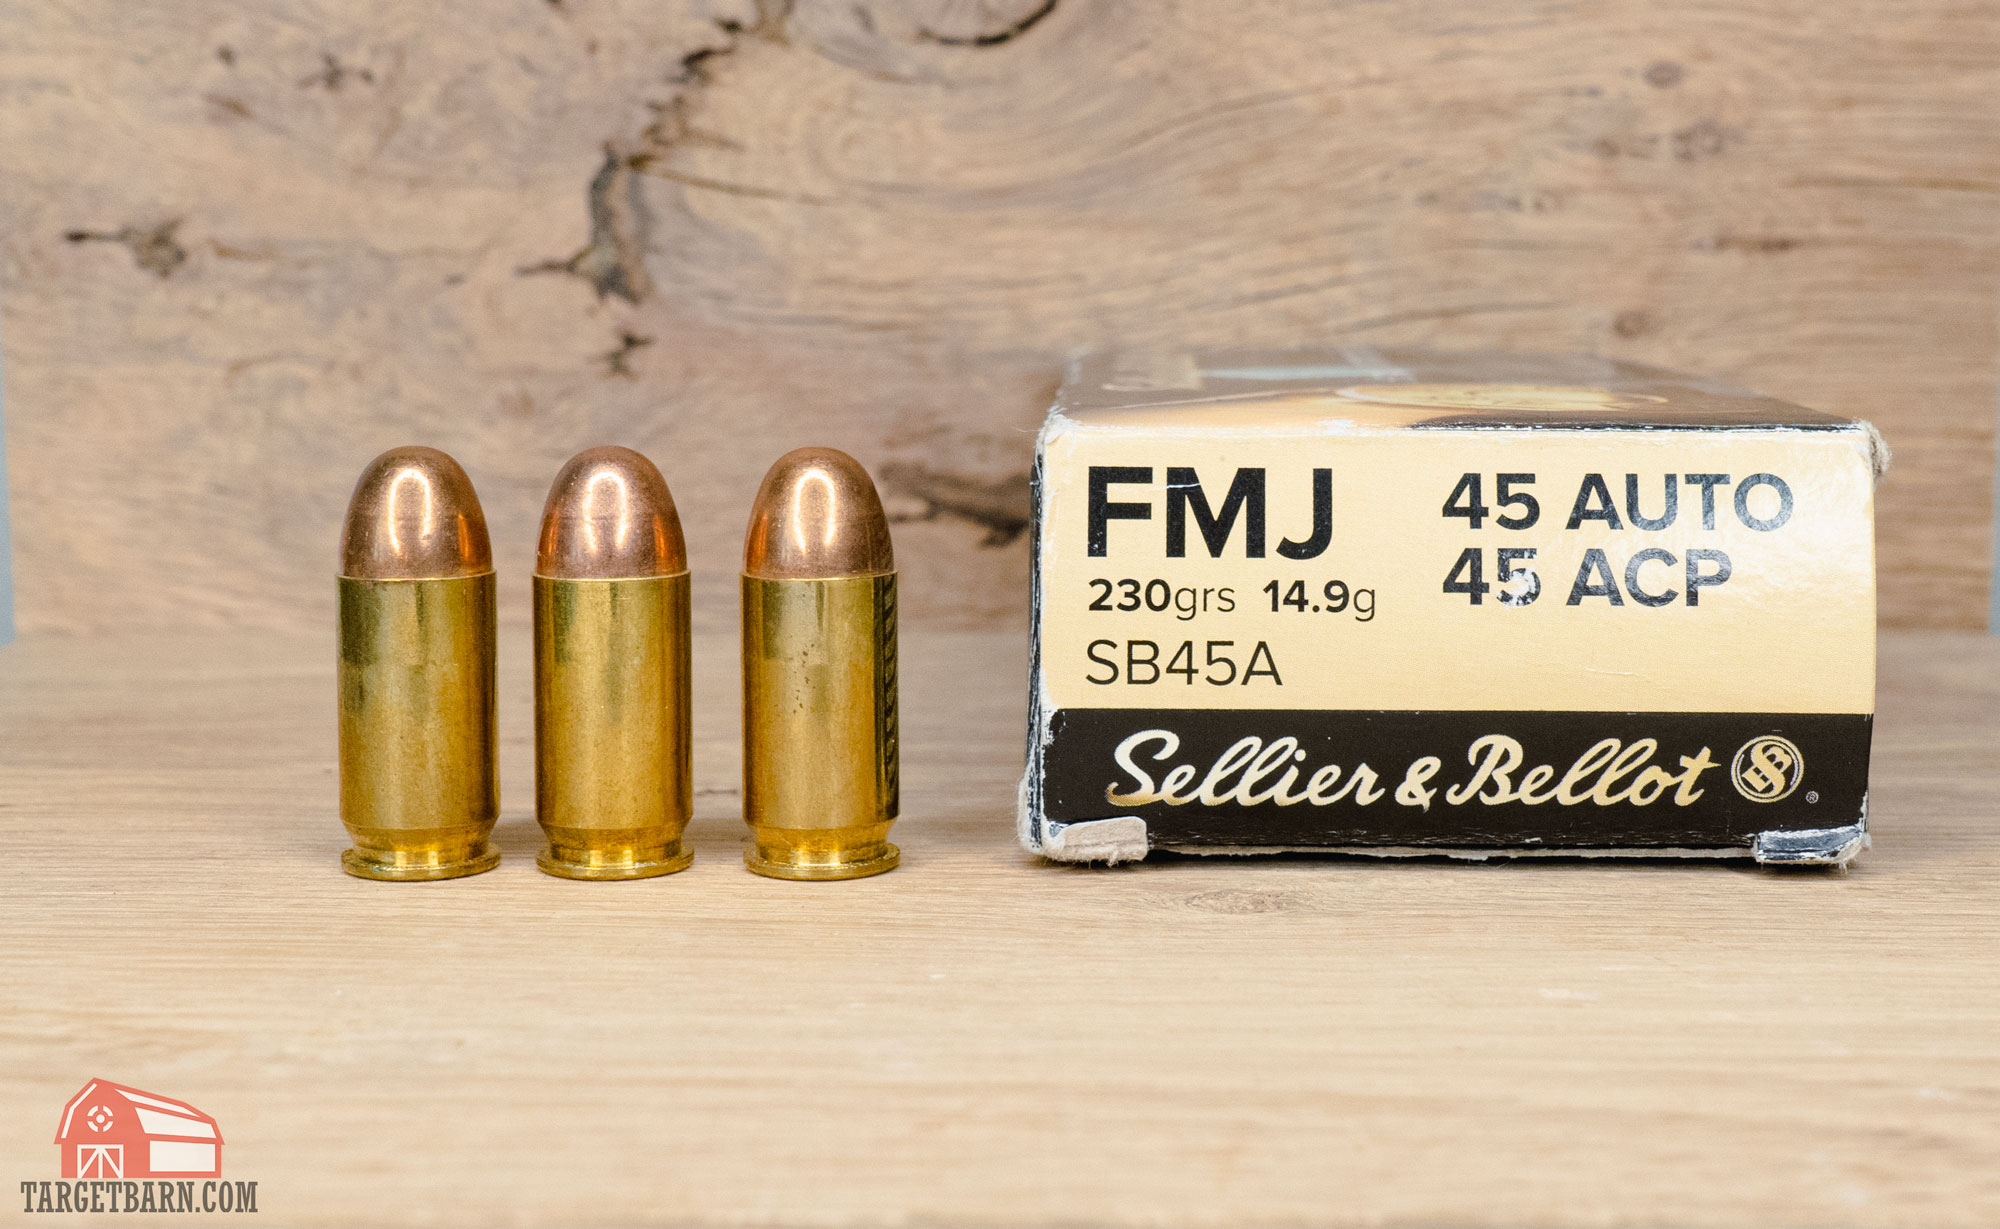 three rounds of .45acp ammo and a box that says "45 auto" and ".45 ACP"